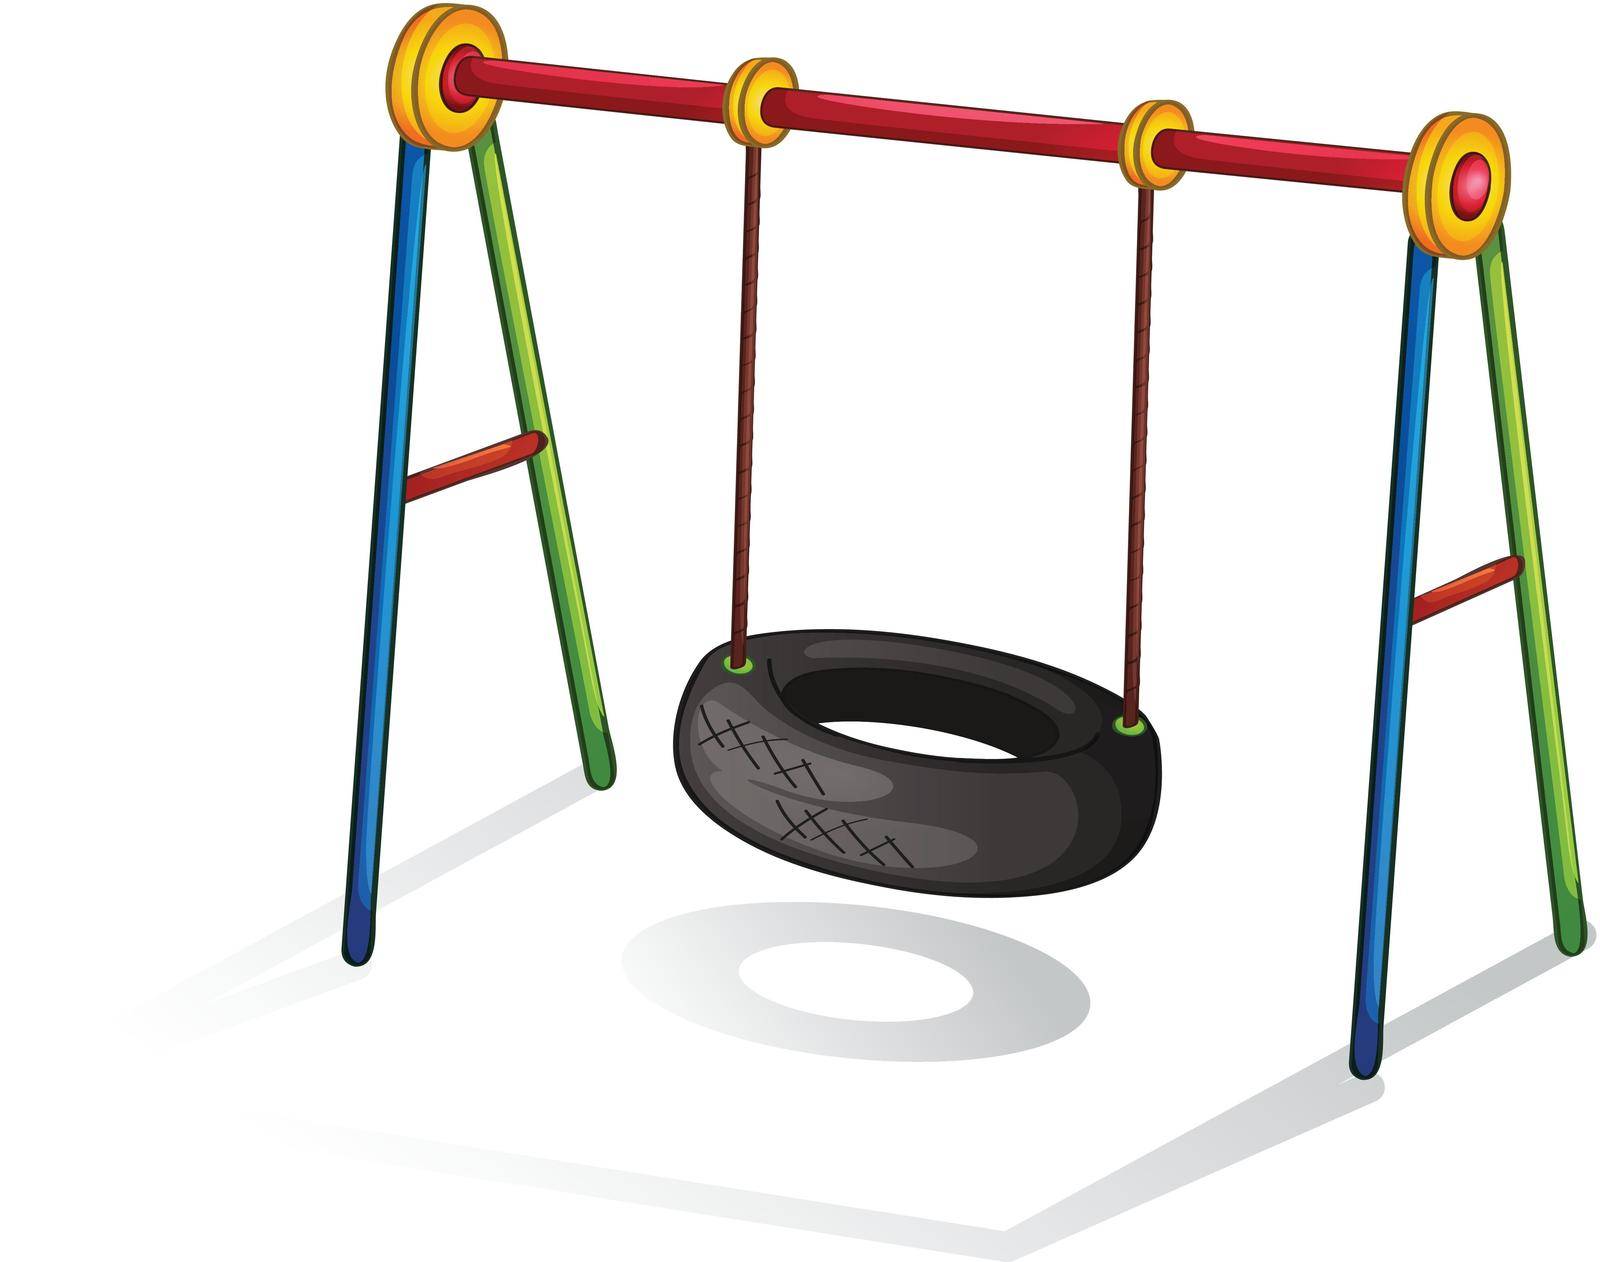 Isolated illustration of play equipment - tire swing